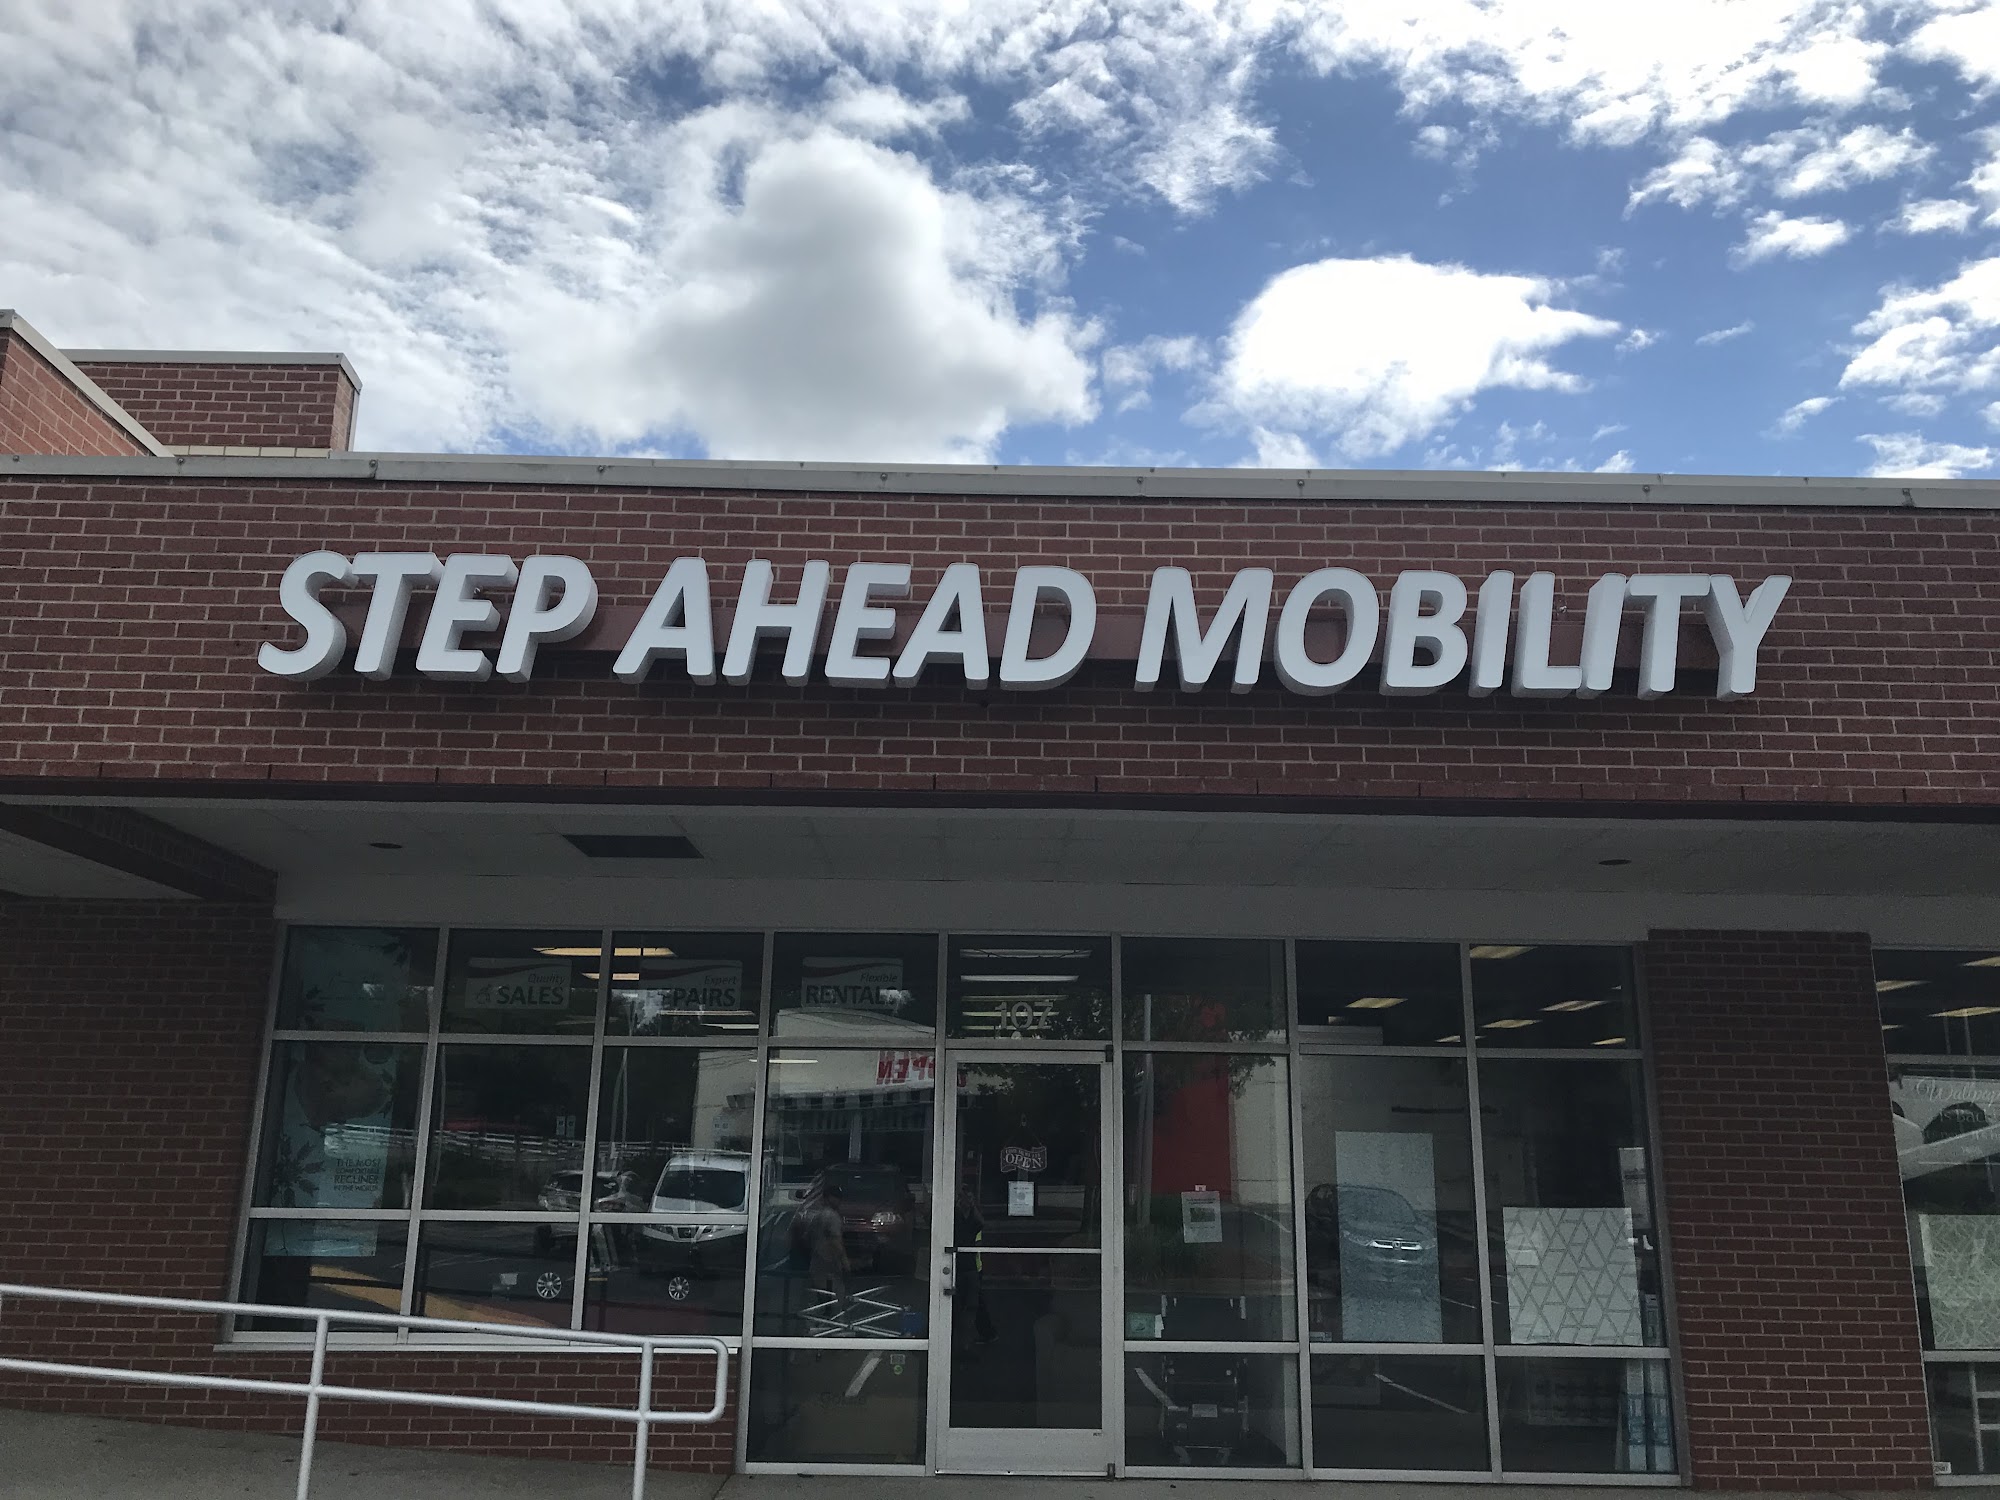 Step Ahead Mobility